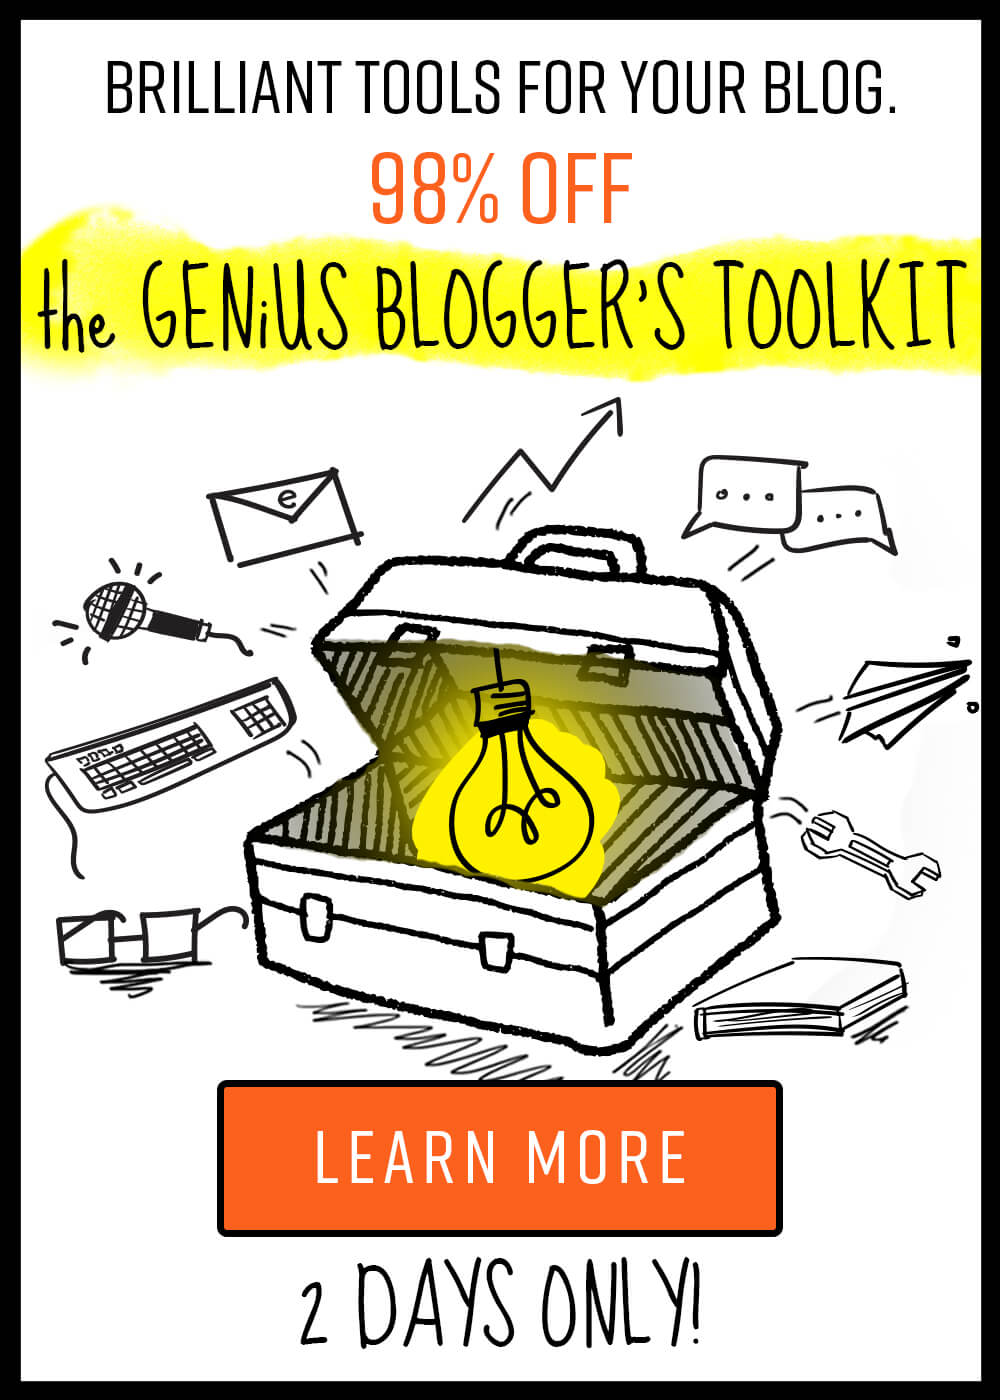 Check out these resources and get some of the best blogging advice available. From eCourses to eBooks, to printable resources; this is one awesome toolkit!